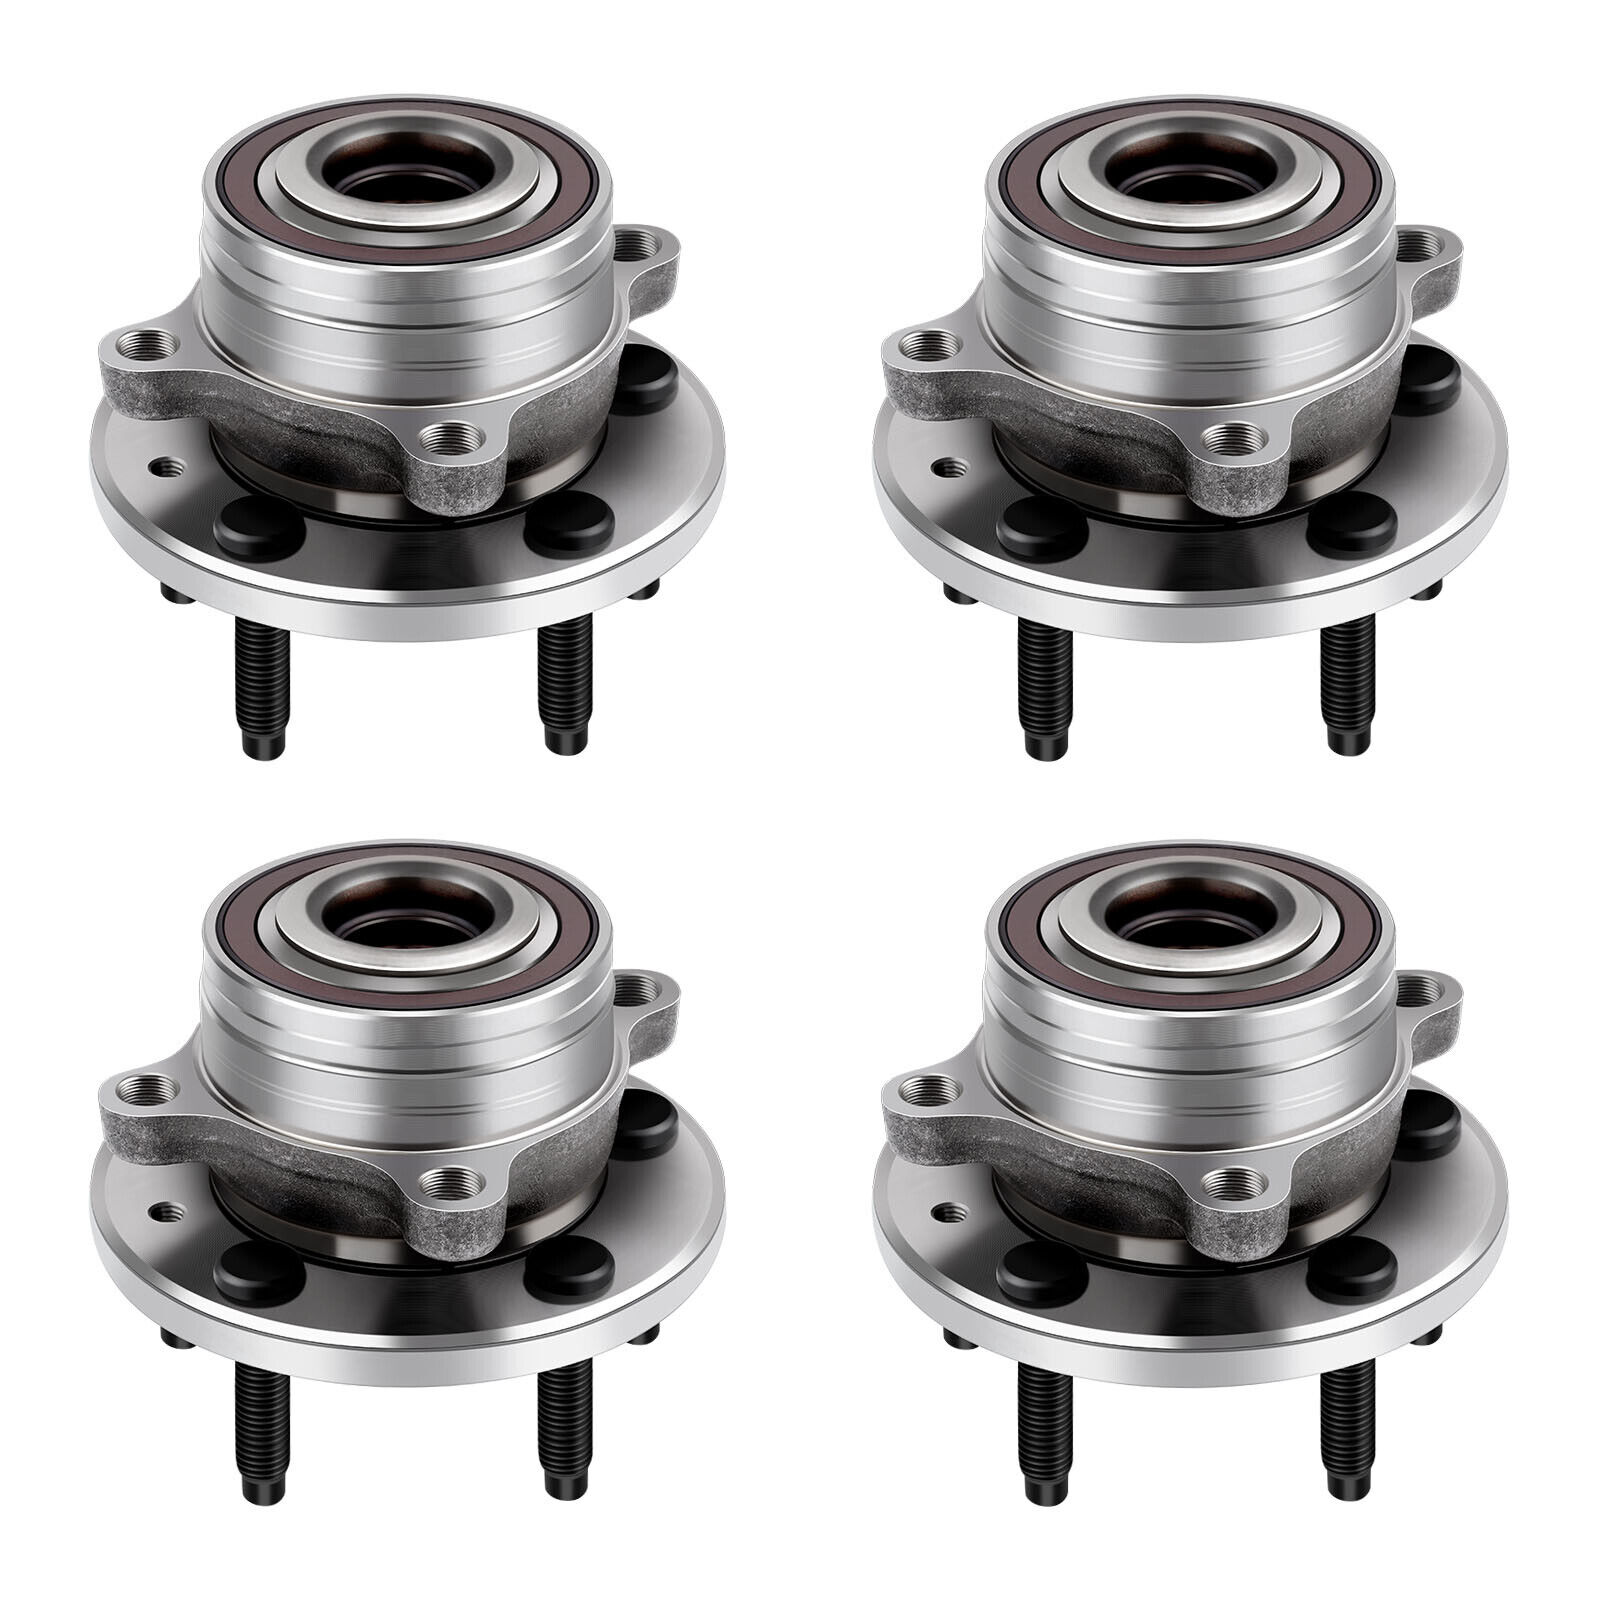 4x Front Rear Wheel Hub Bearing Assembly For Ford Explorer 2011-18 3.5L 512460